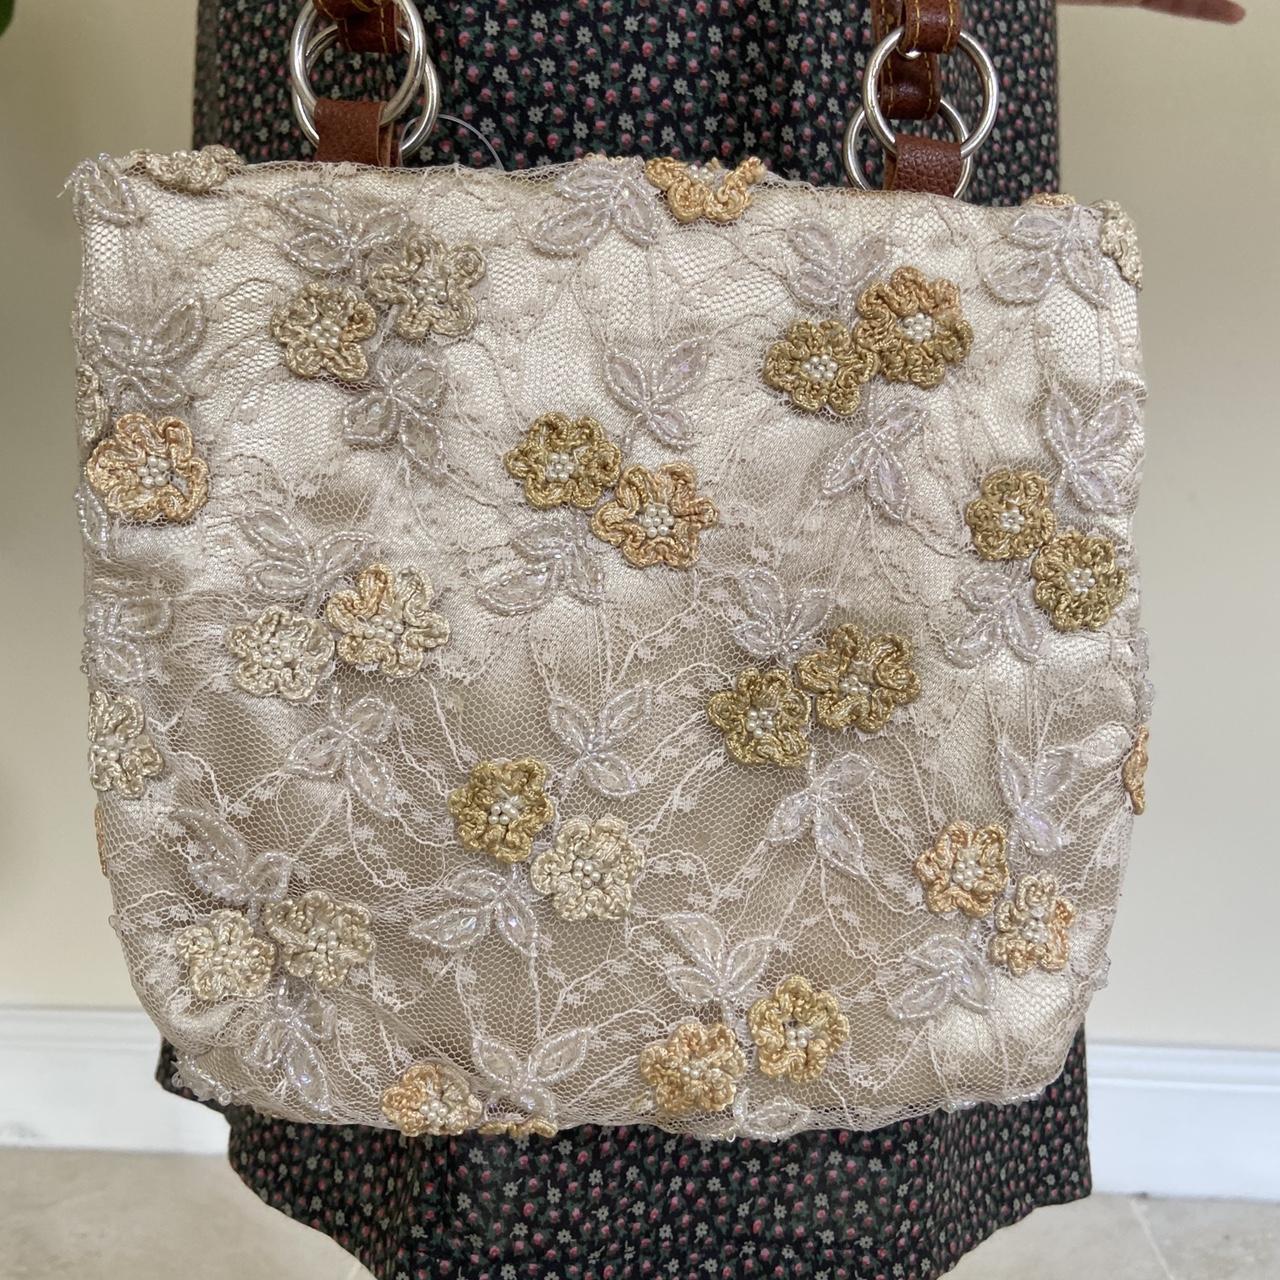 Embroidered Lace Handbag - Champagne